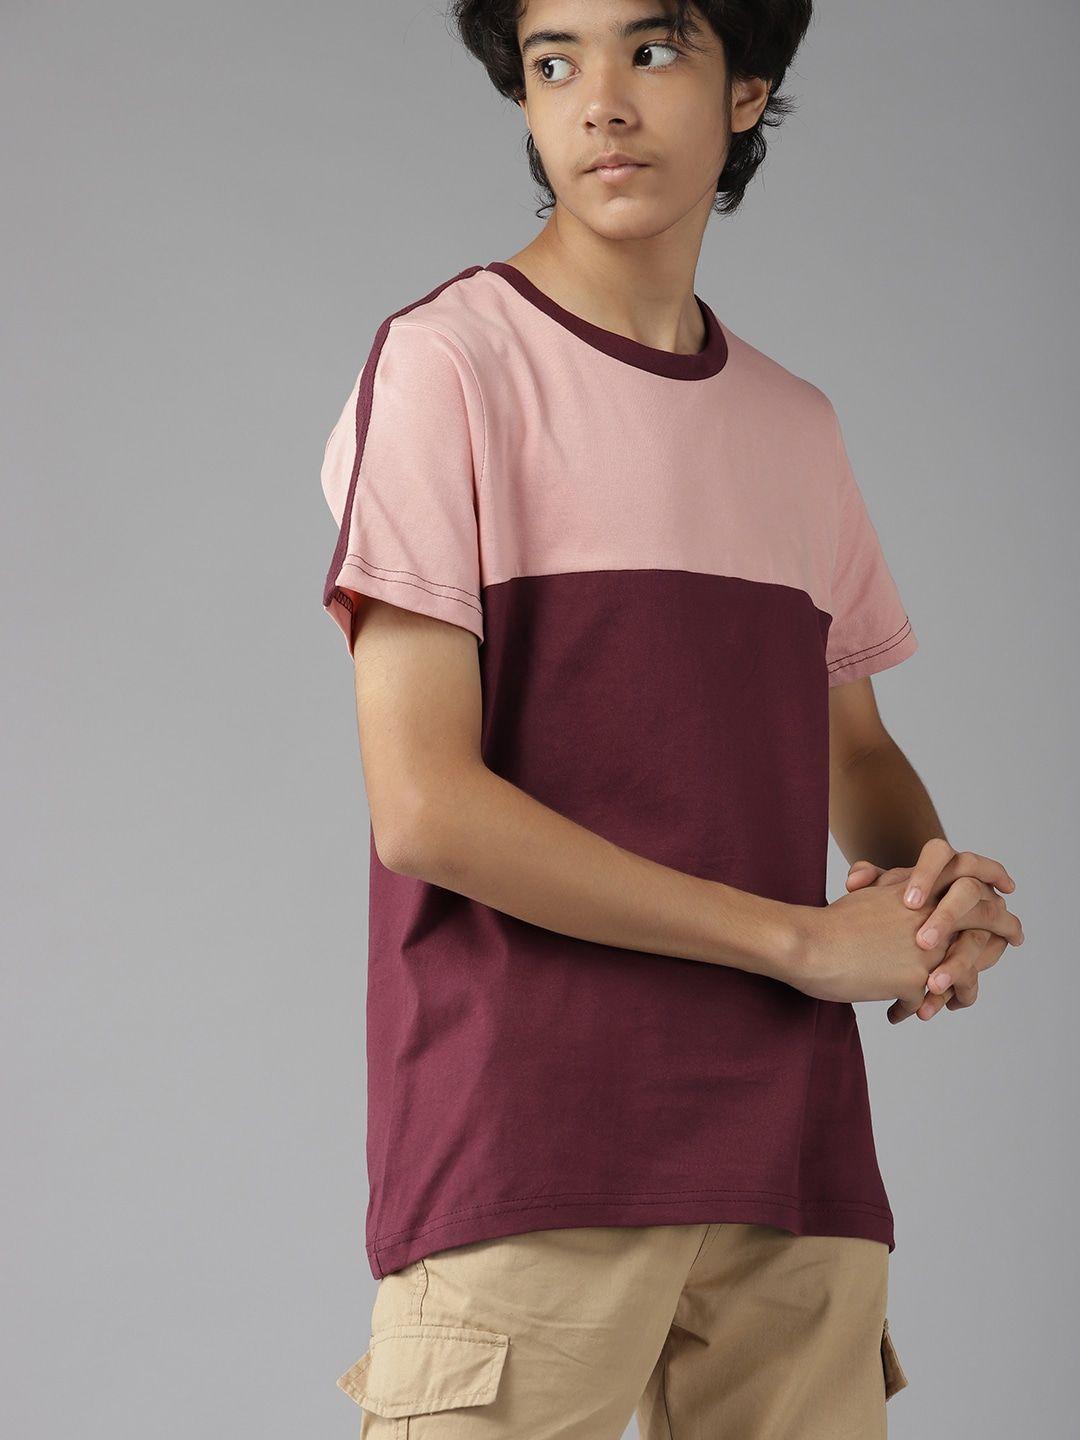 uth by roadster boys peach-coloured & maroon pure cotton colourblocked t-shirt